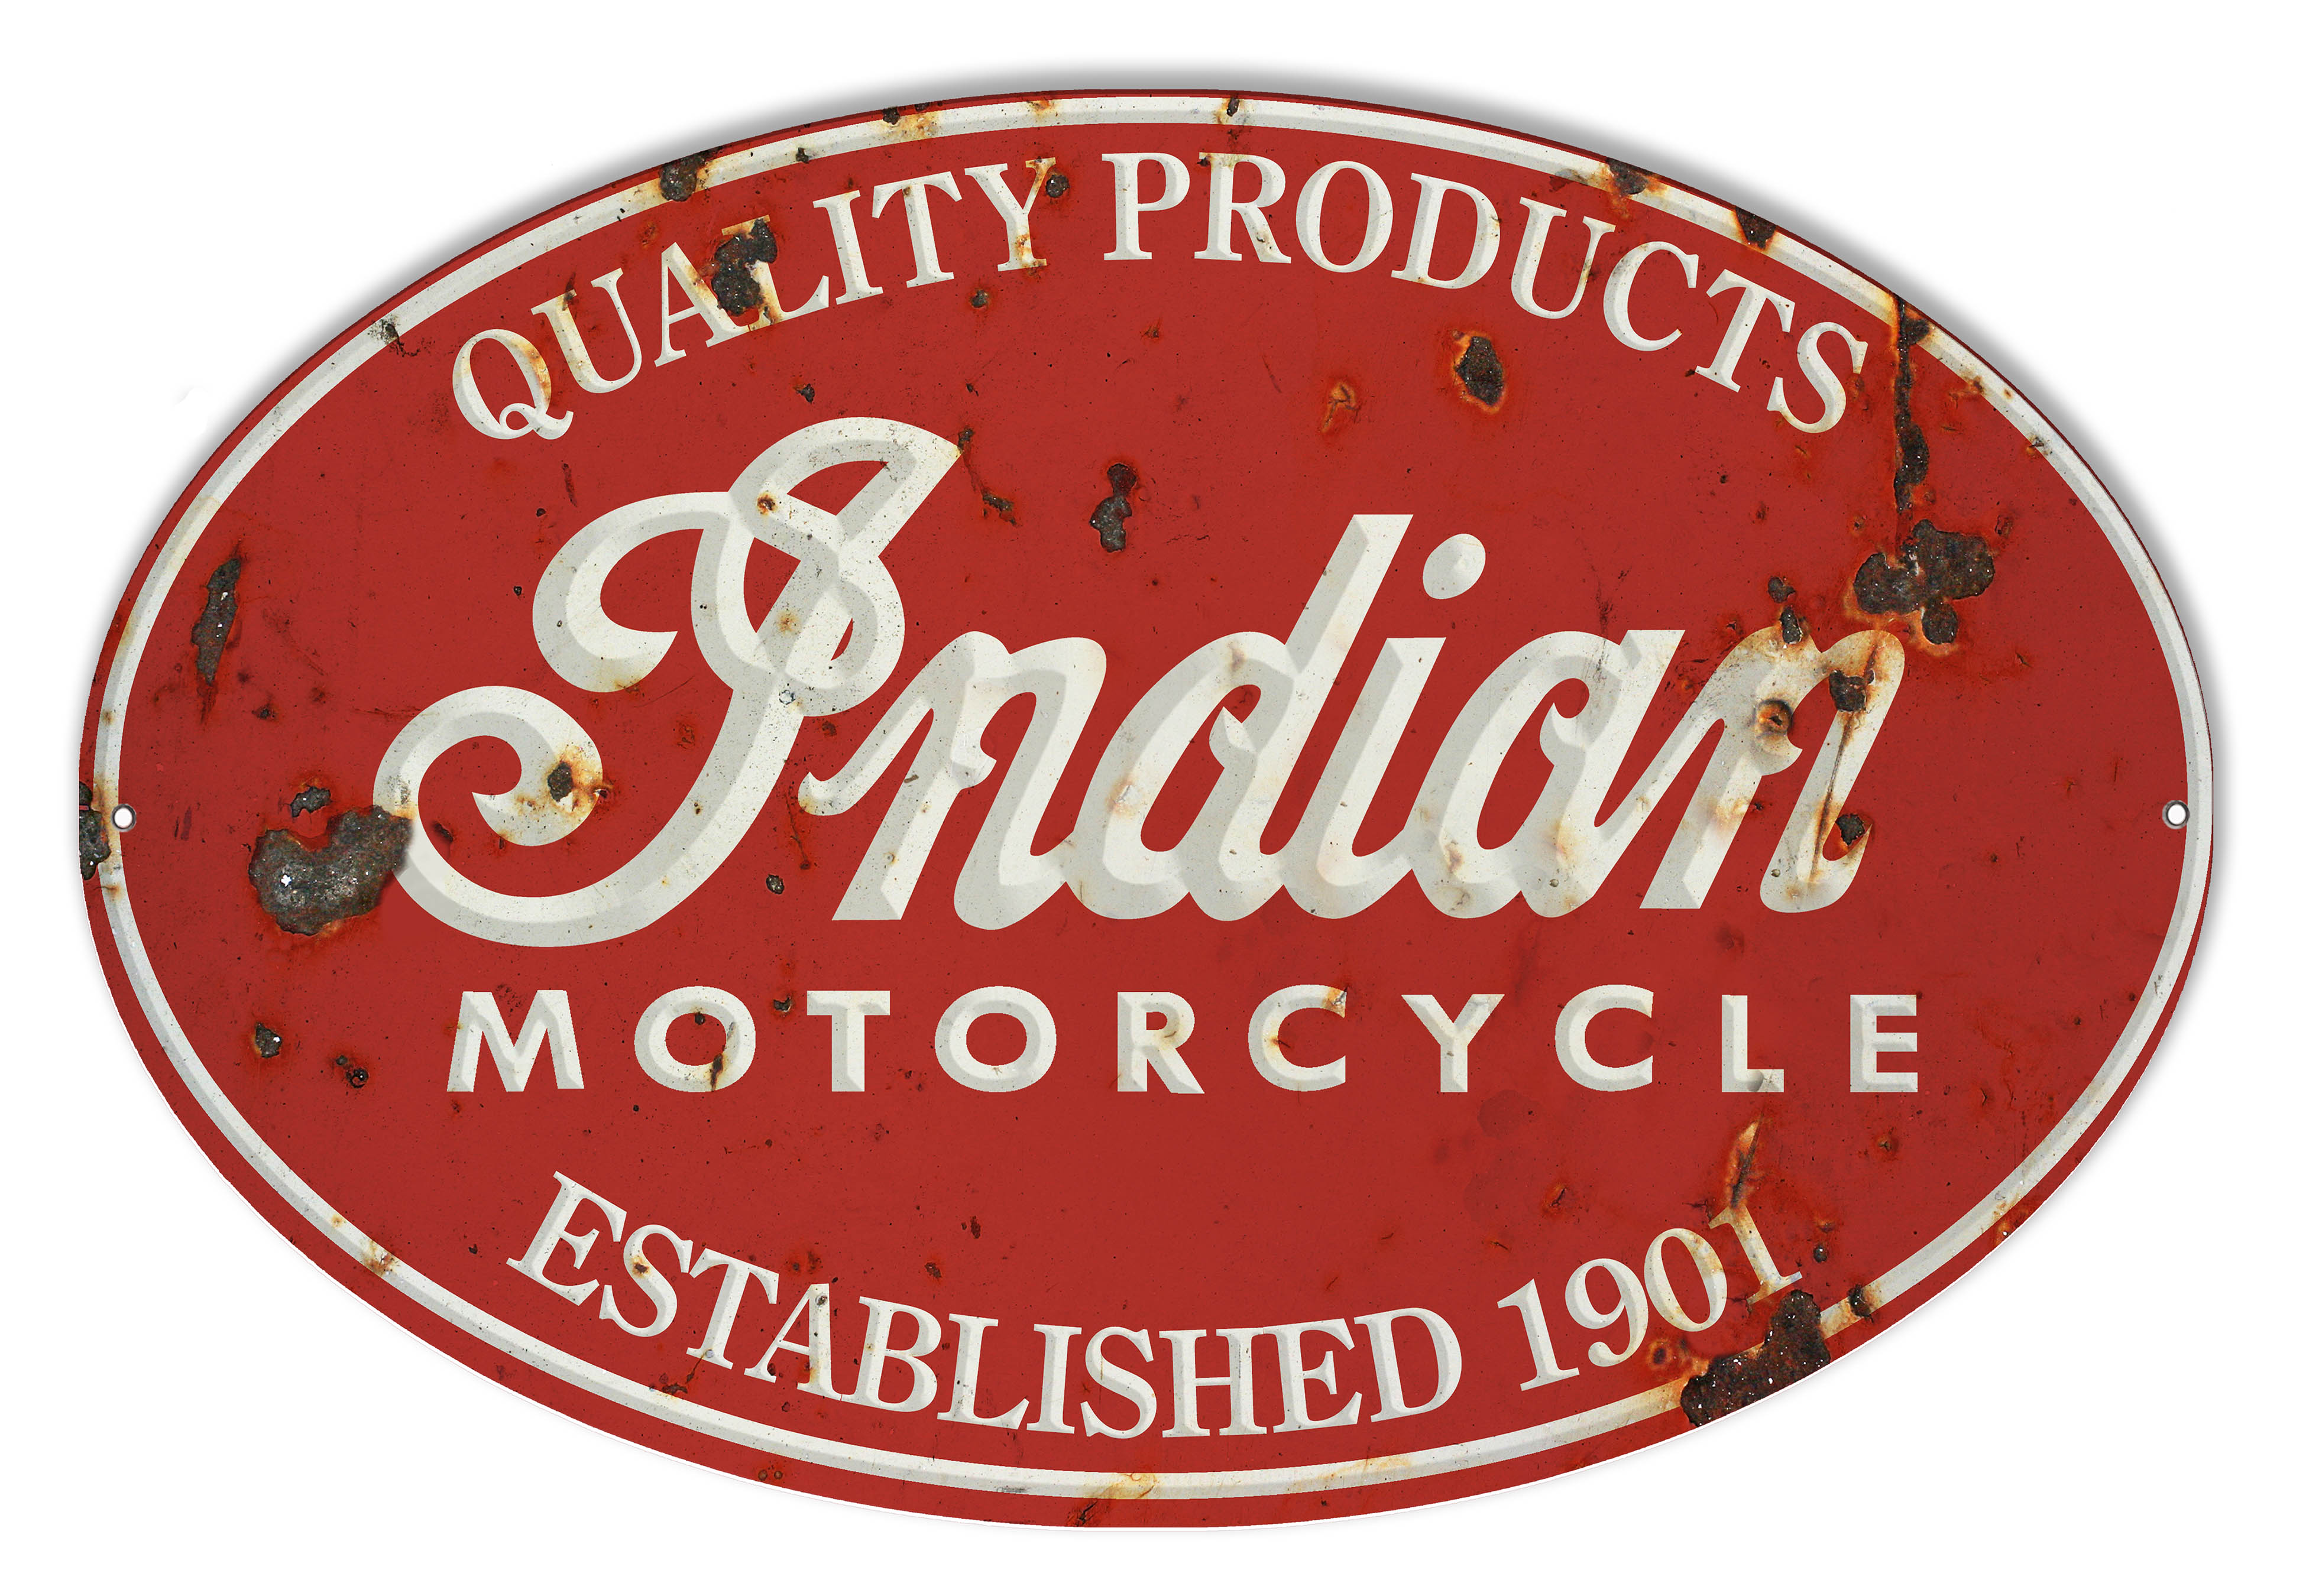 Indian Motorcycle 1901 Series Vintage Metal Sign 9x14 - Reproduction ...